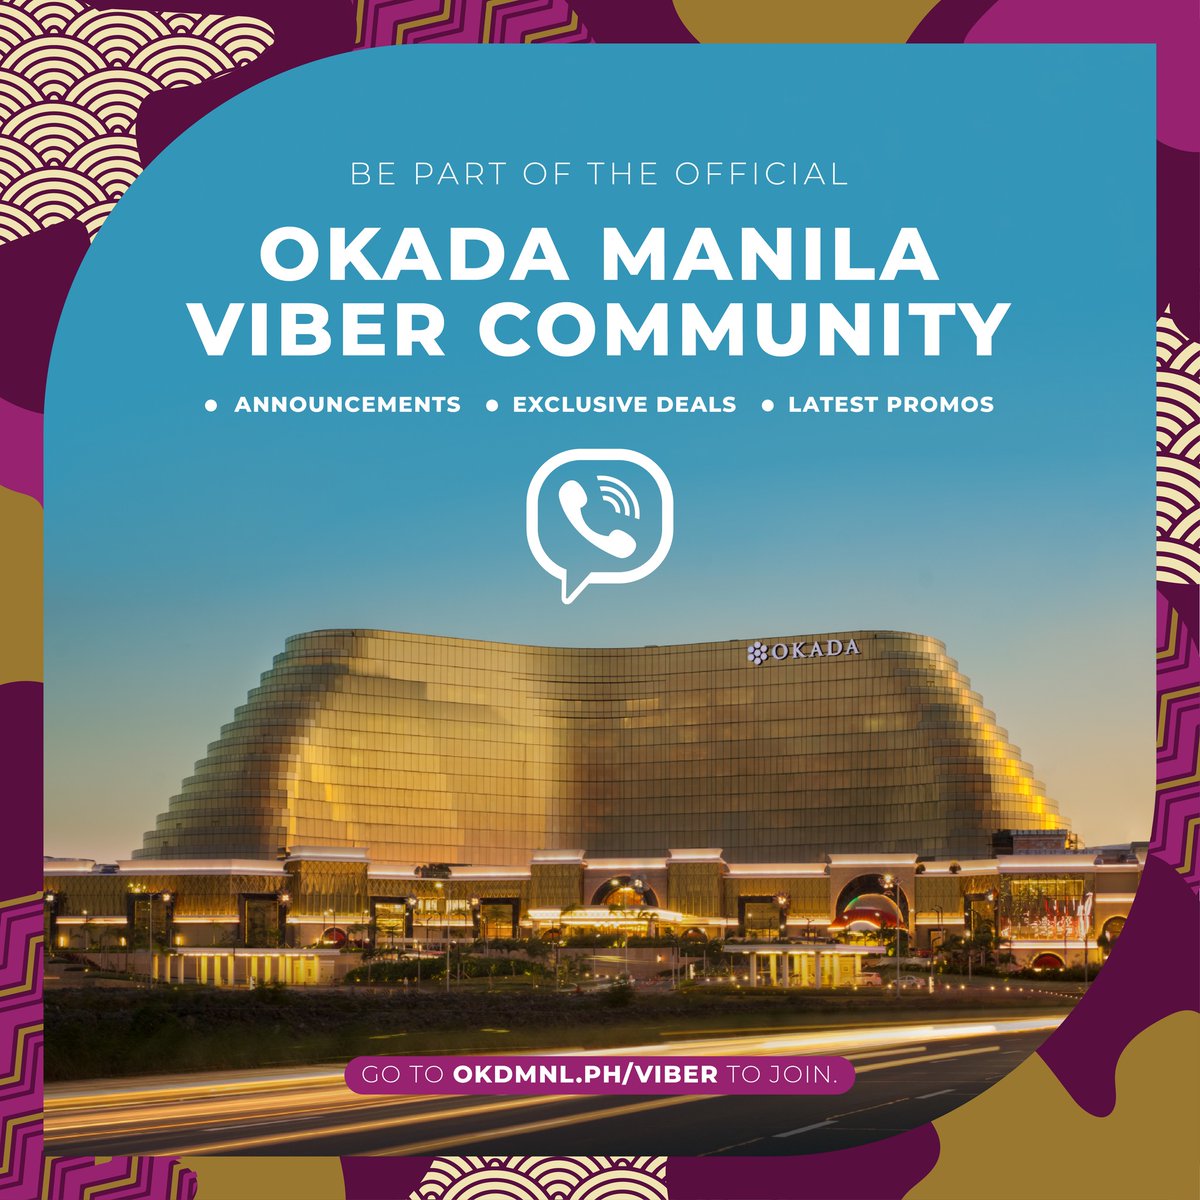 Want to get the latest updates on Okada Manila’s exclusive promos and events? Join our 5-star community on Viber! Tap this link to get started: okdmnl.ph/Viber